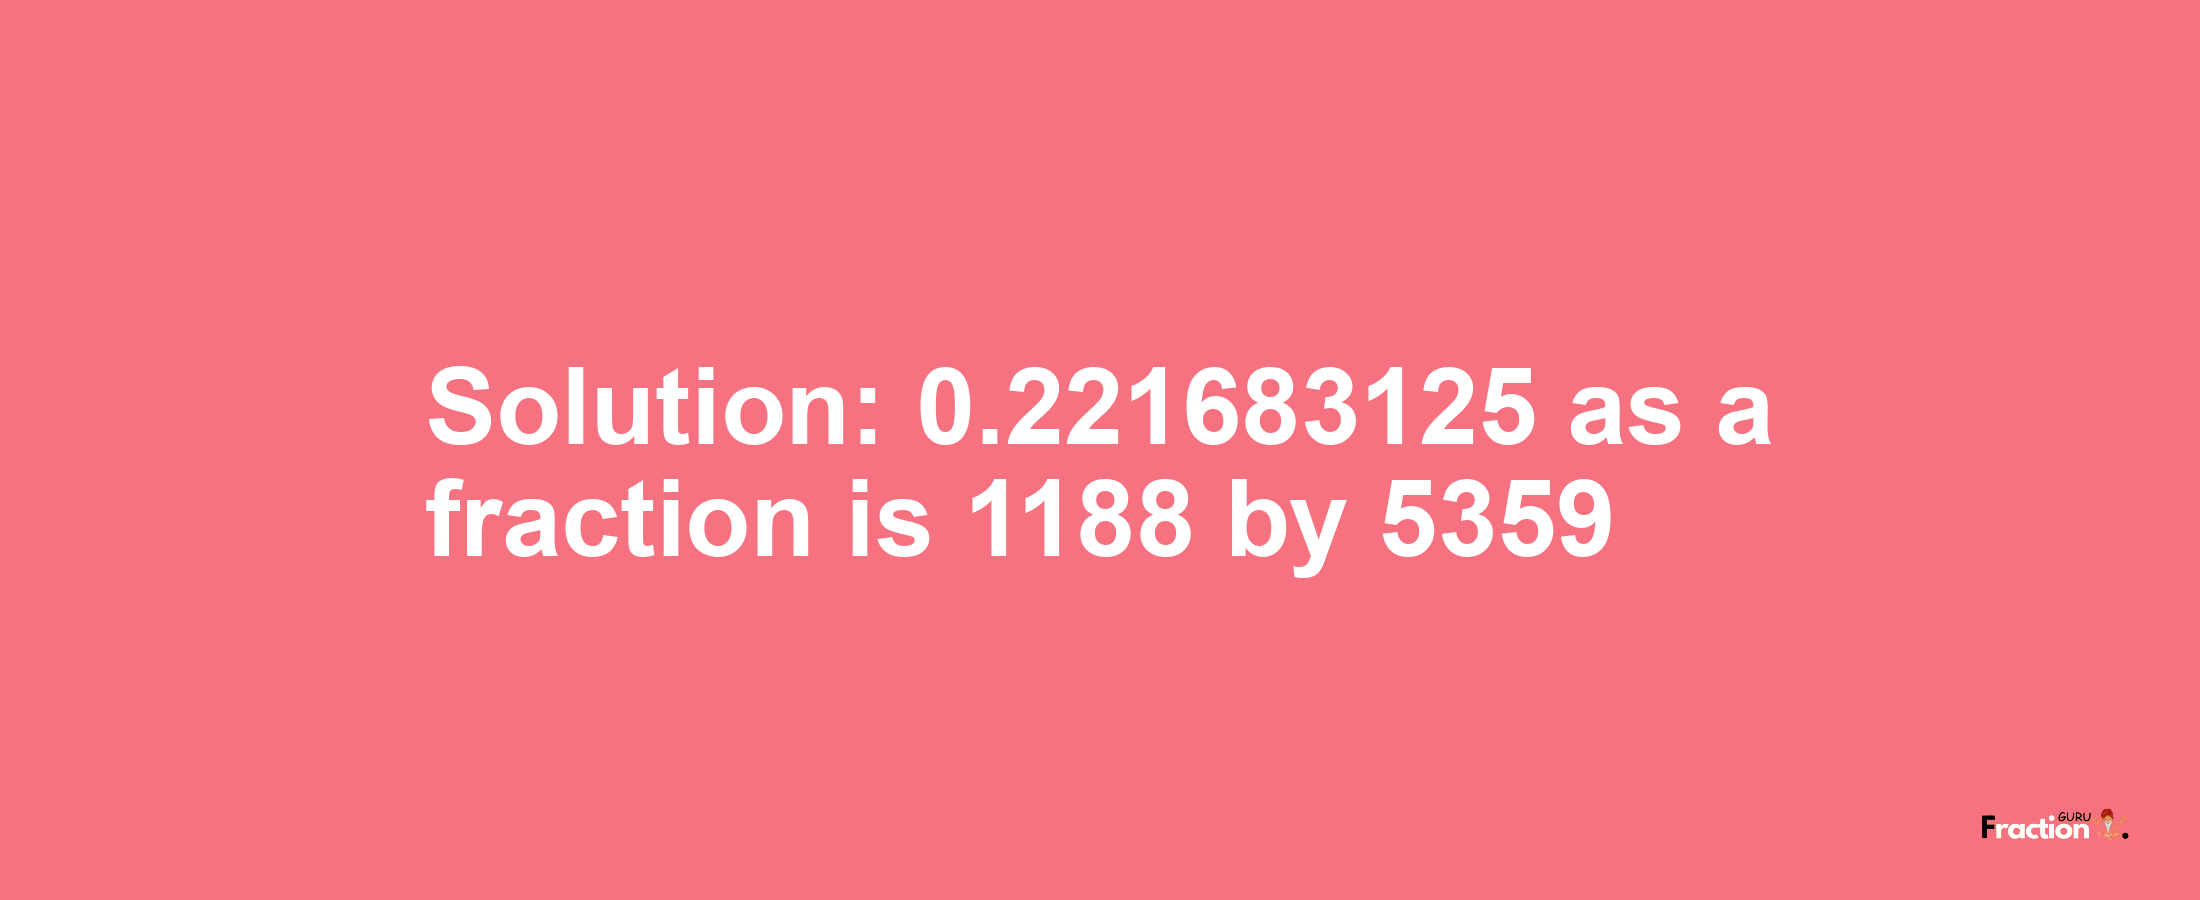 Solution:0.221683125 as a fraction is 1188/5359